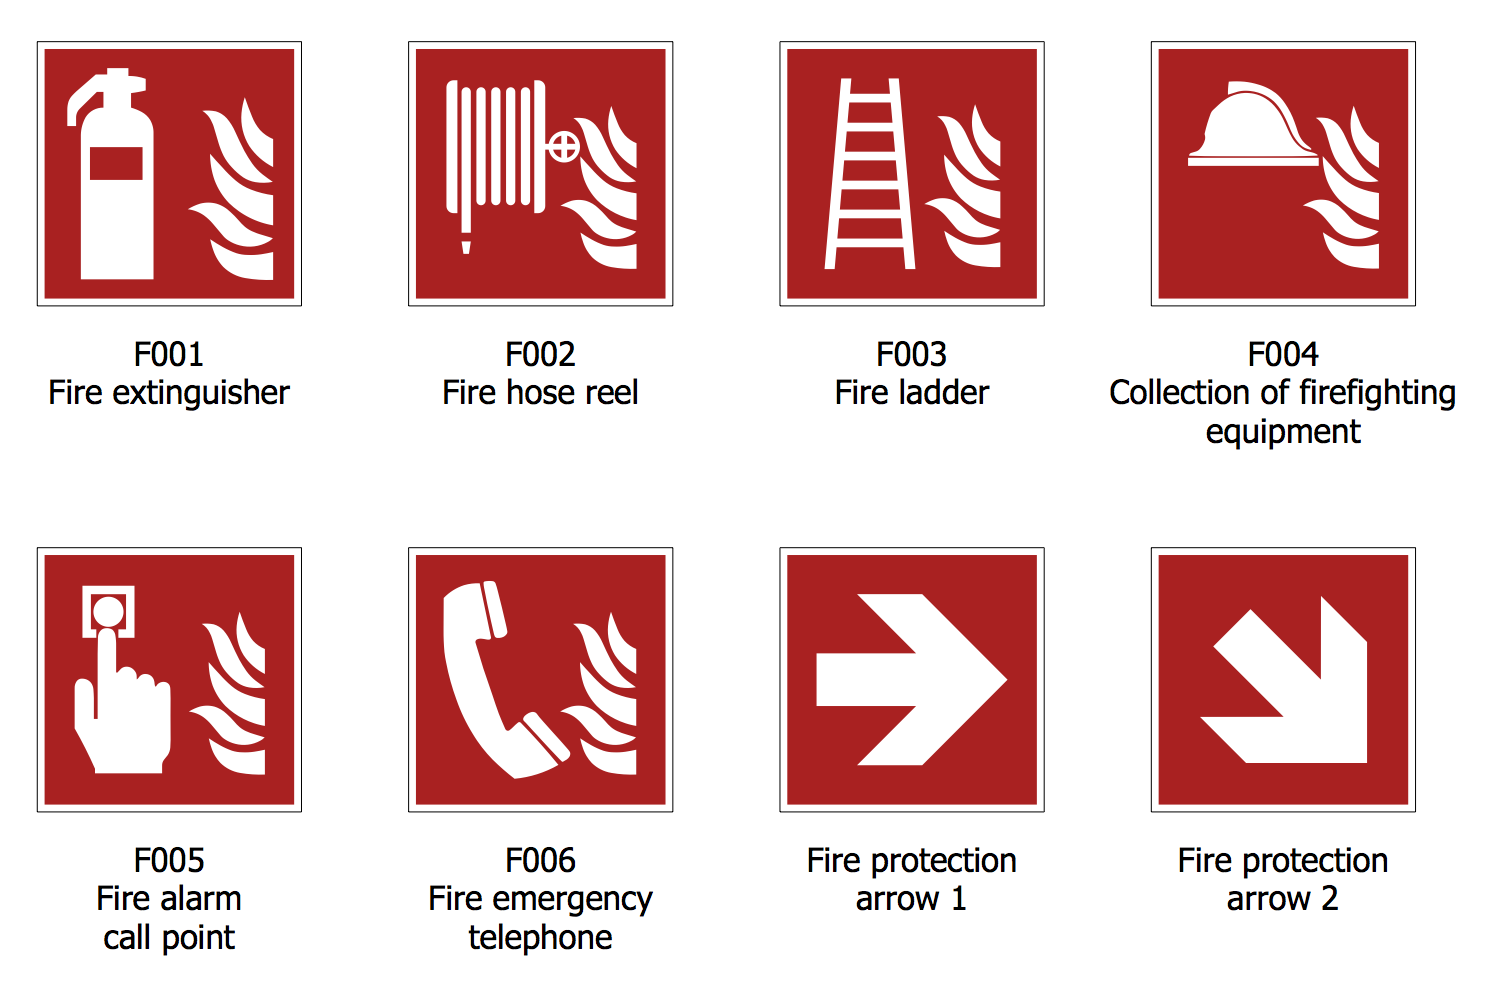 Fire and Emergency Plans Solution | ConceptDraw.com